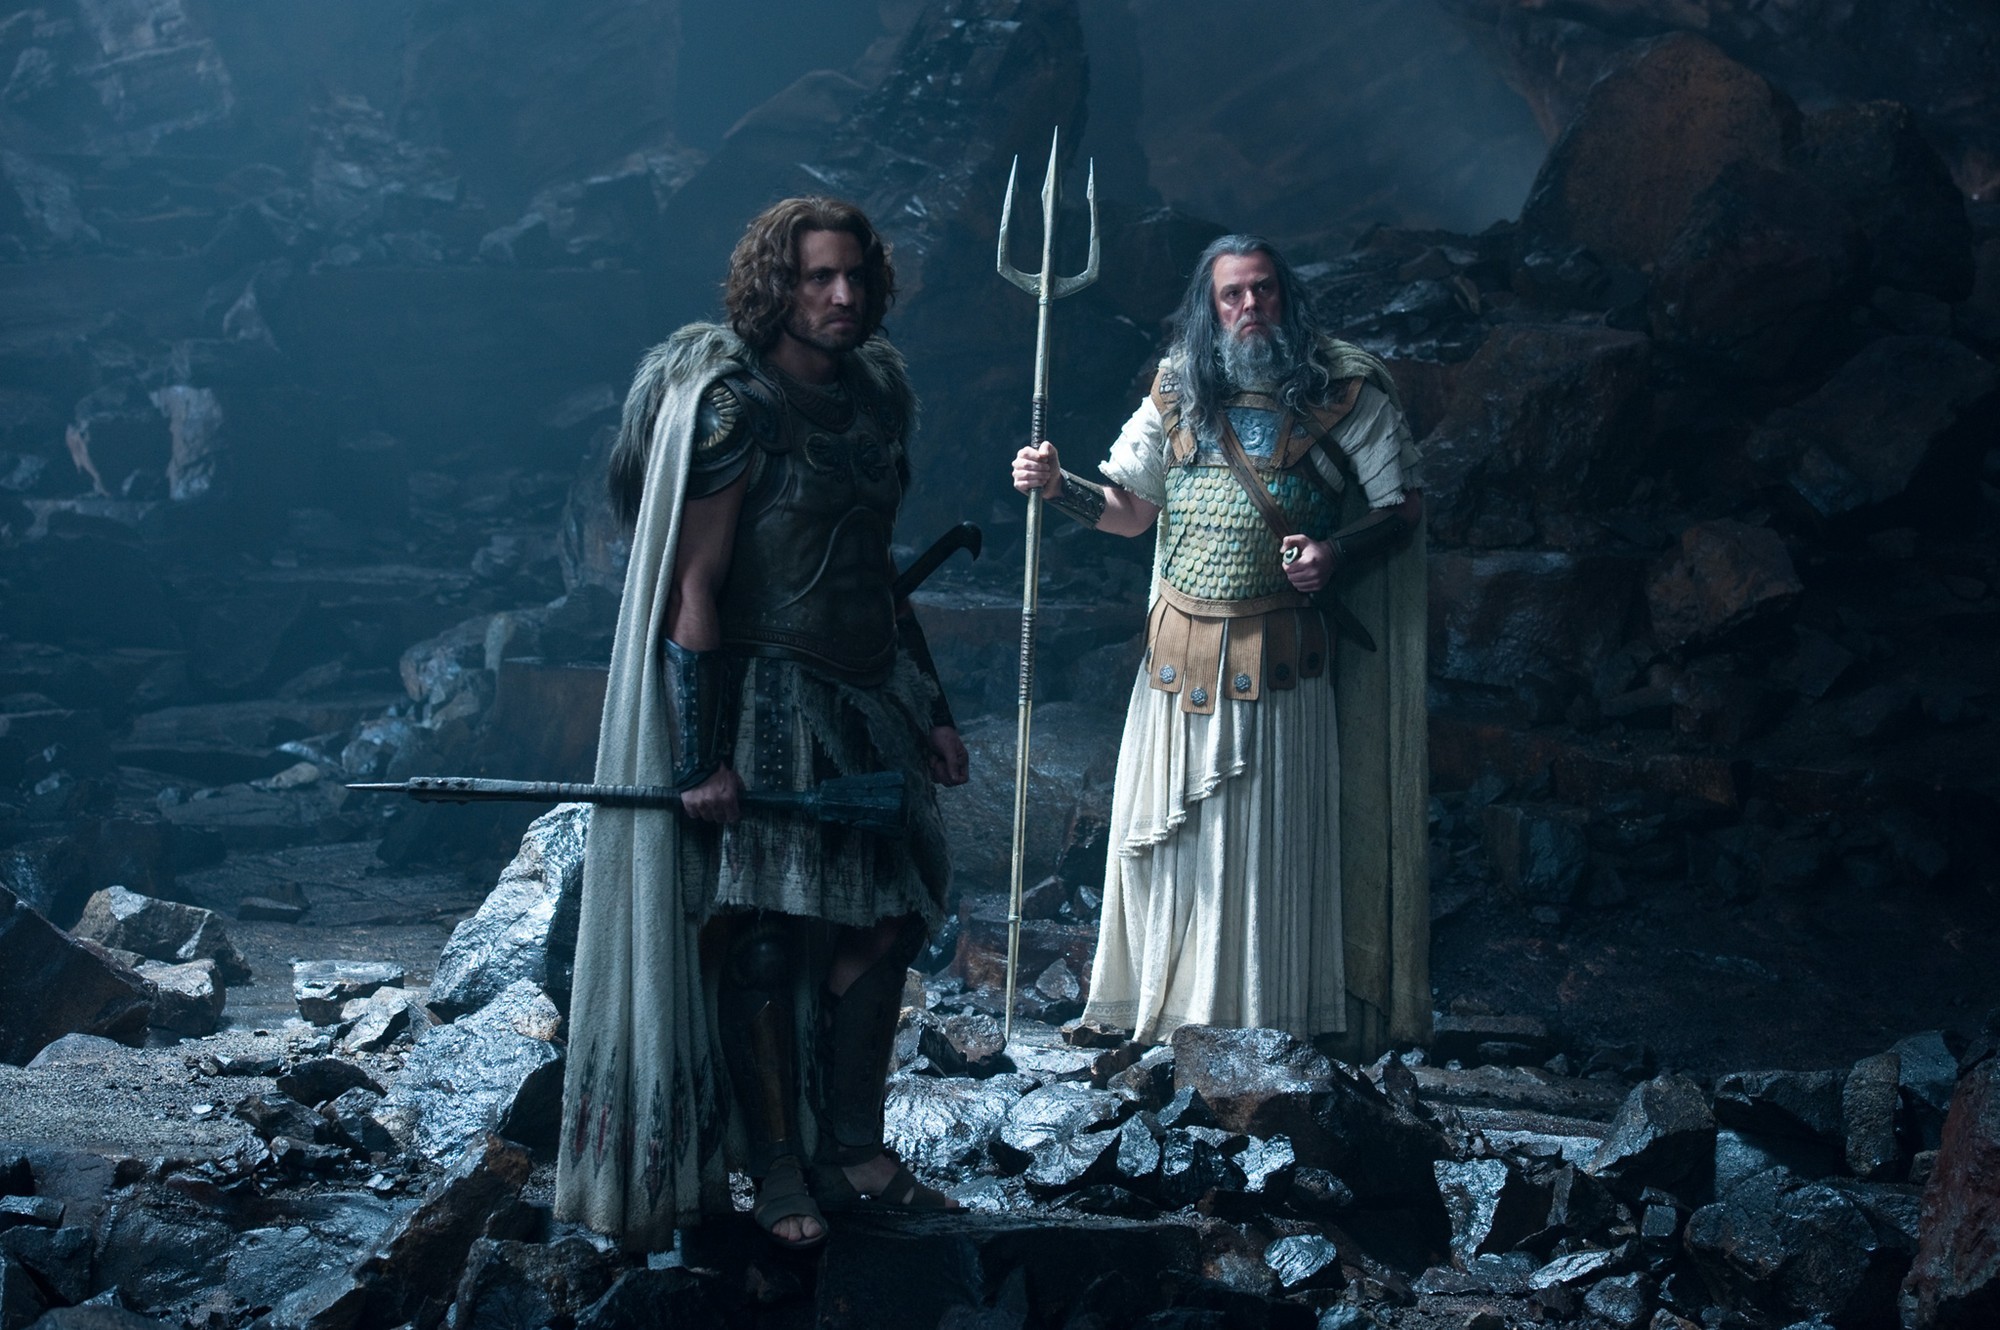 Edgar Ramirez stars as Ares and Danny Huston stars as Poseidon in Warner Bros. Pictures' Wrath of the Titans (2012)